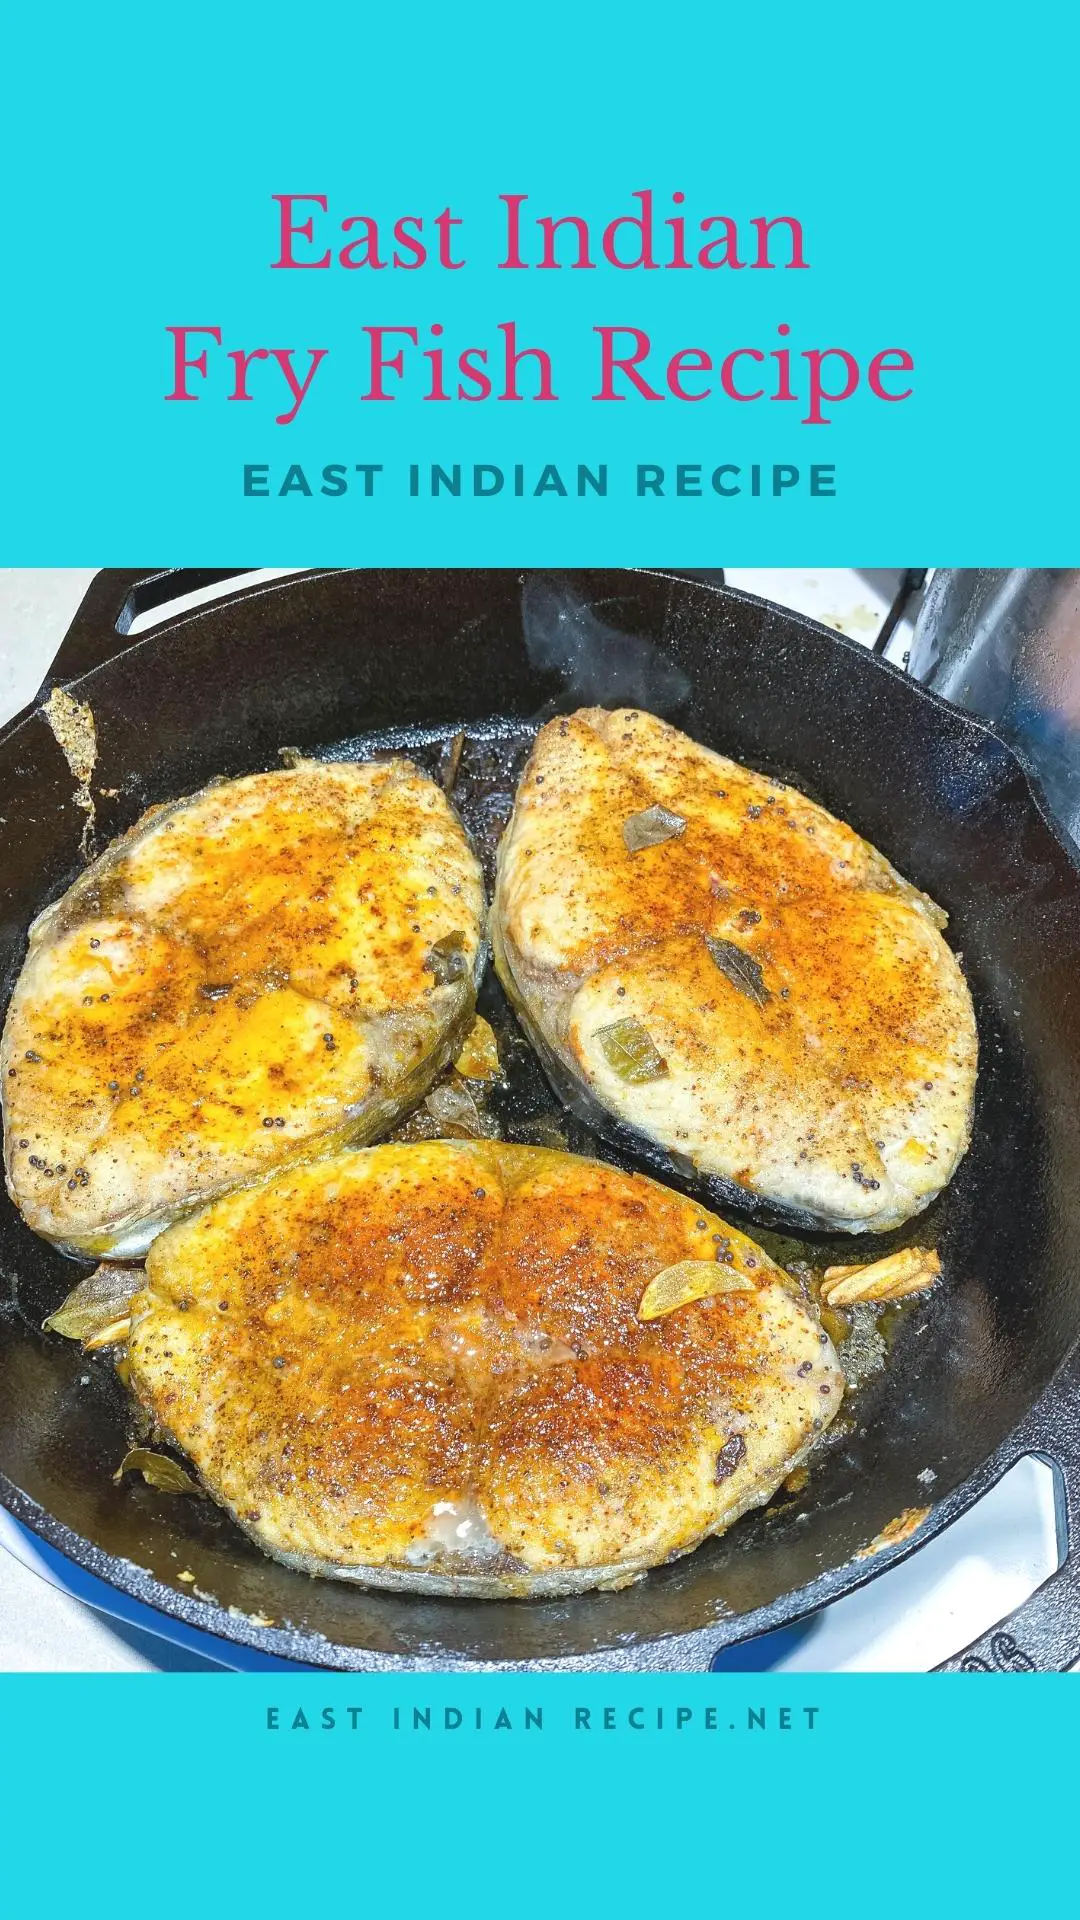 Fry Fish - Pan Fried Fish Fillets - East Indian Recipes